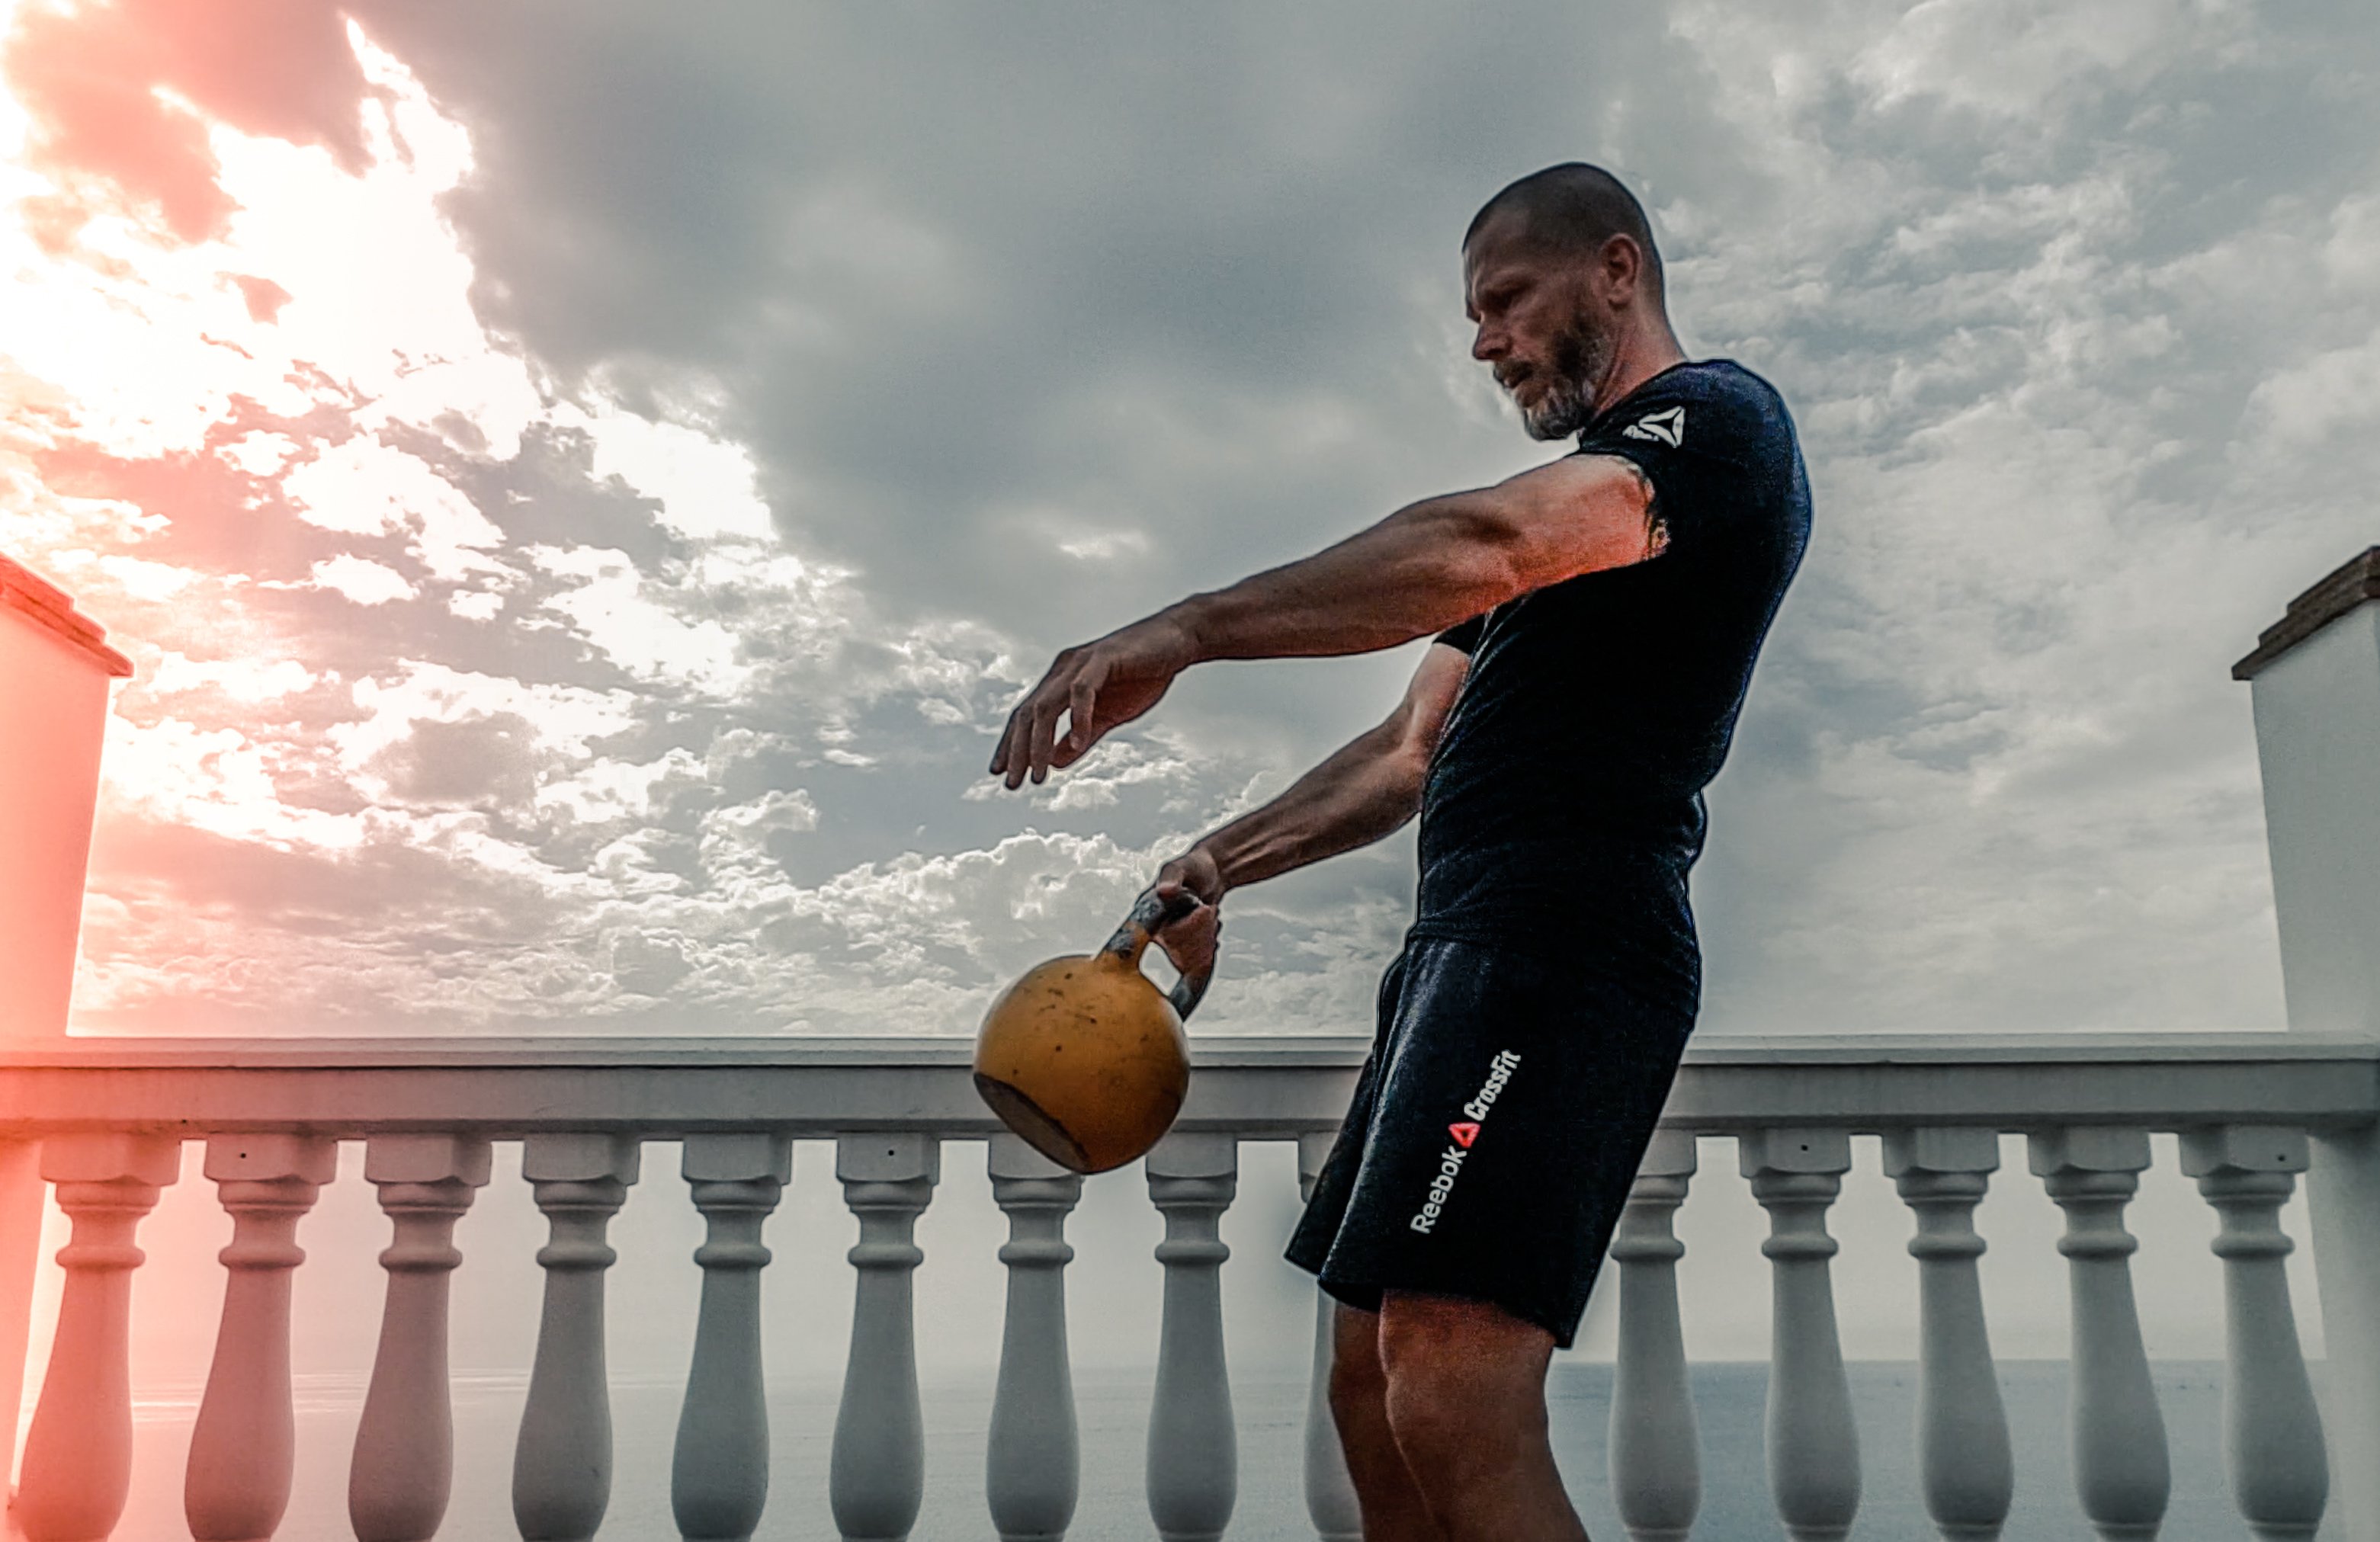 Canva - Man in Black Shirt Carrying Kettle Bell Outdoors